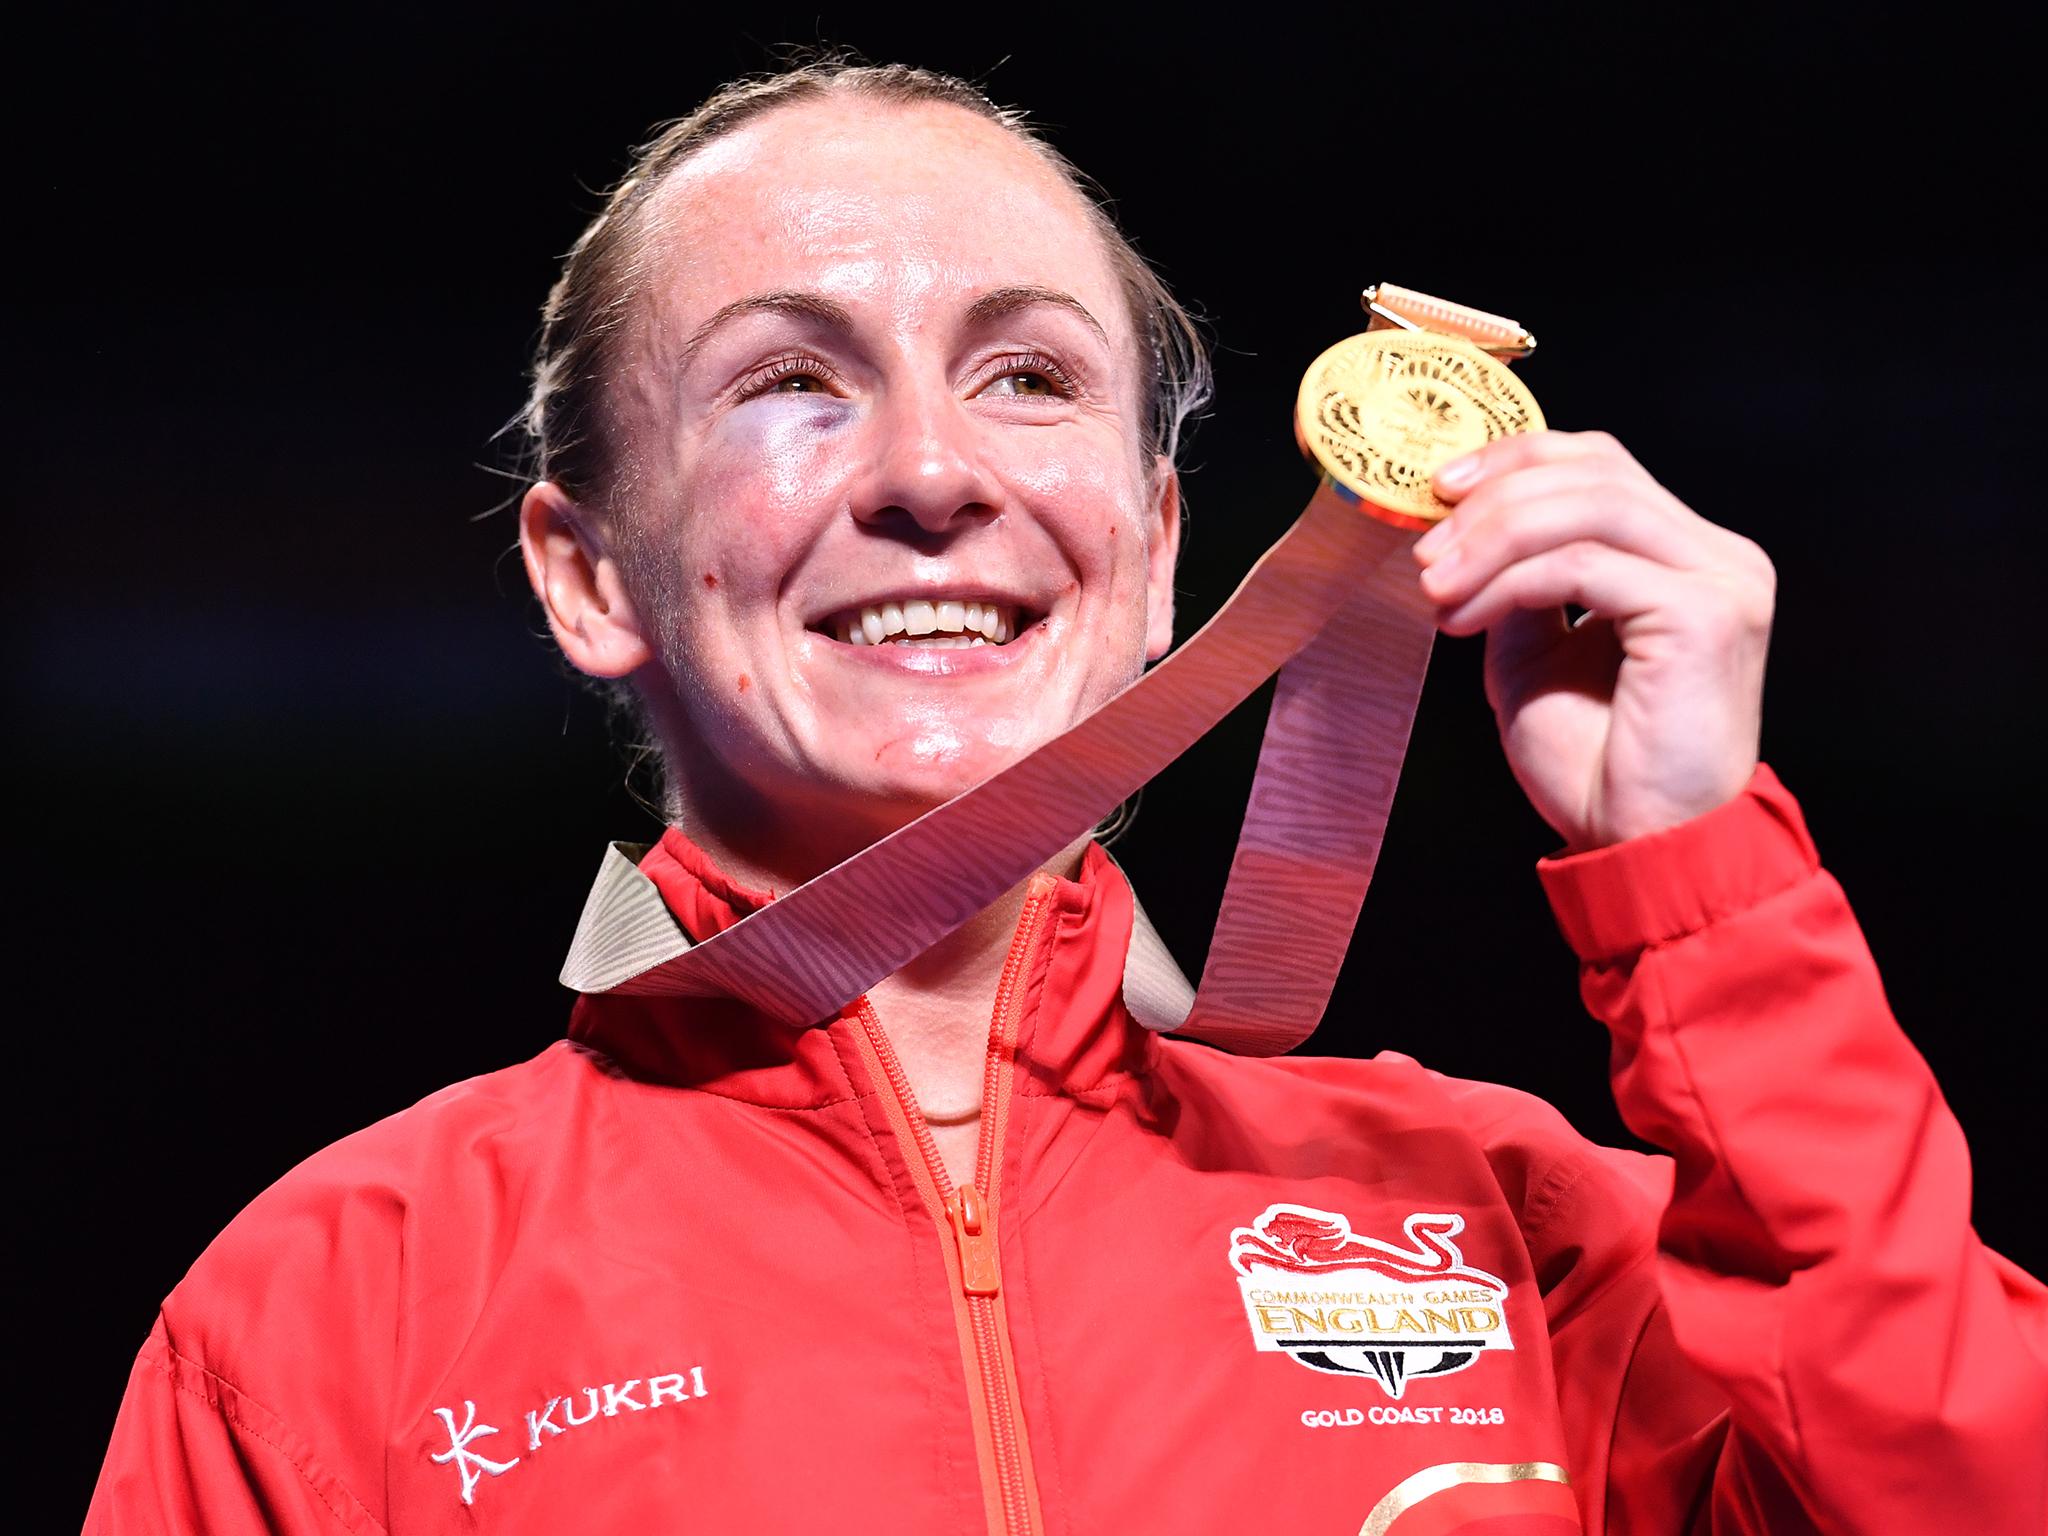 Lisa Whiteside claimed gold in the women's flyweight division